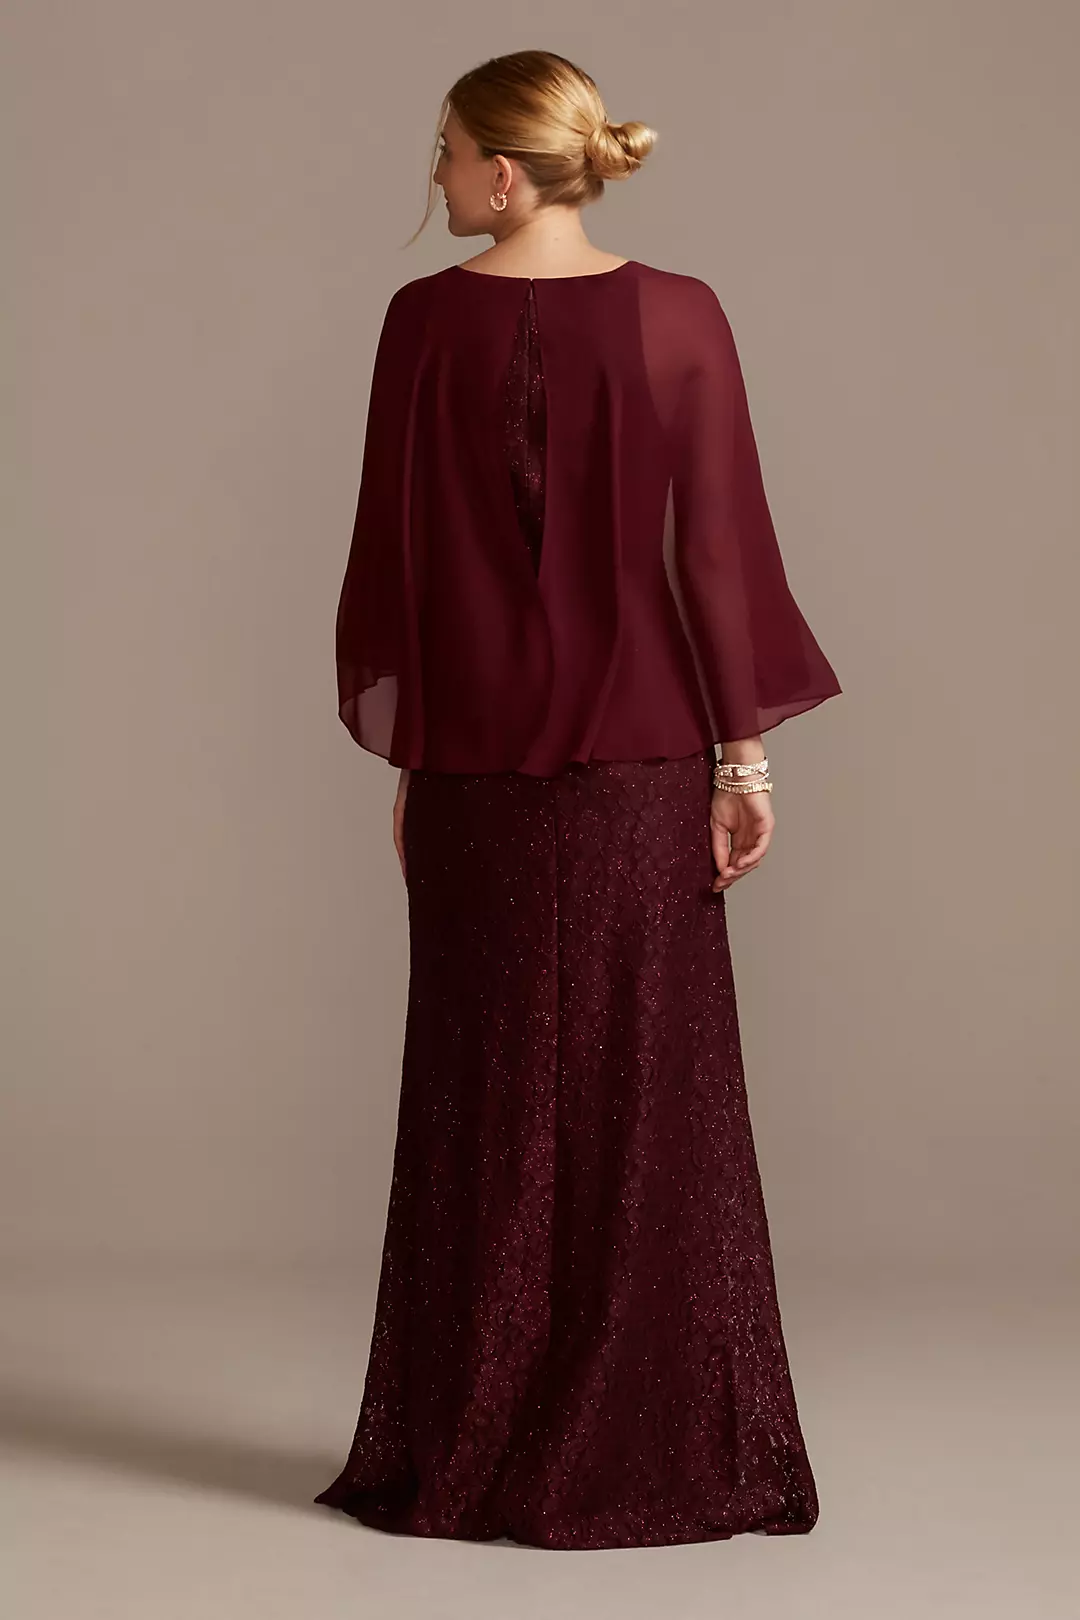 Glitter Lace Sheath Dress with Cape Sleeves Image 2